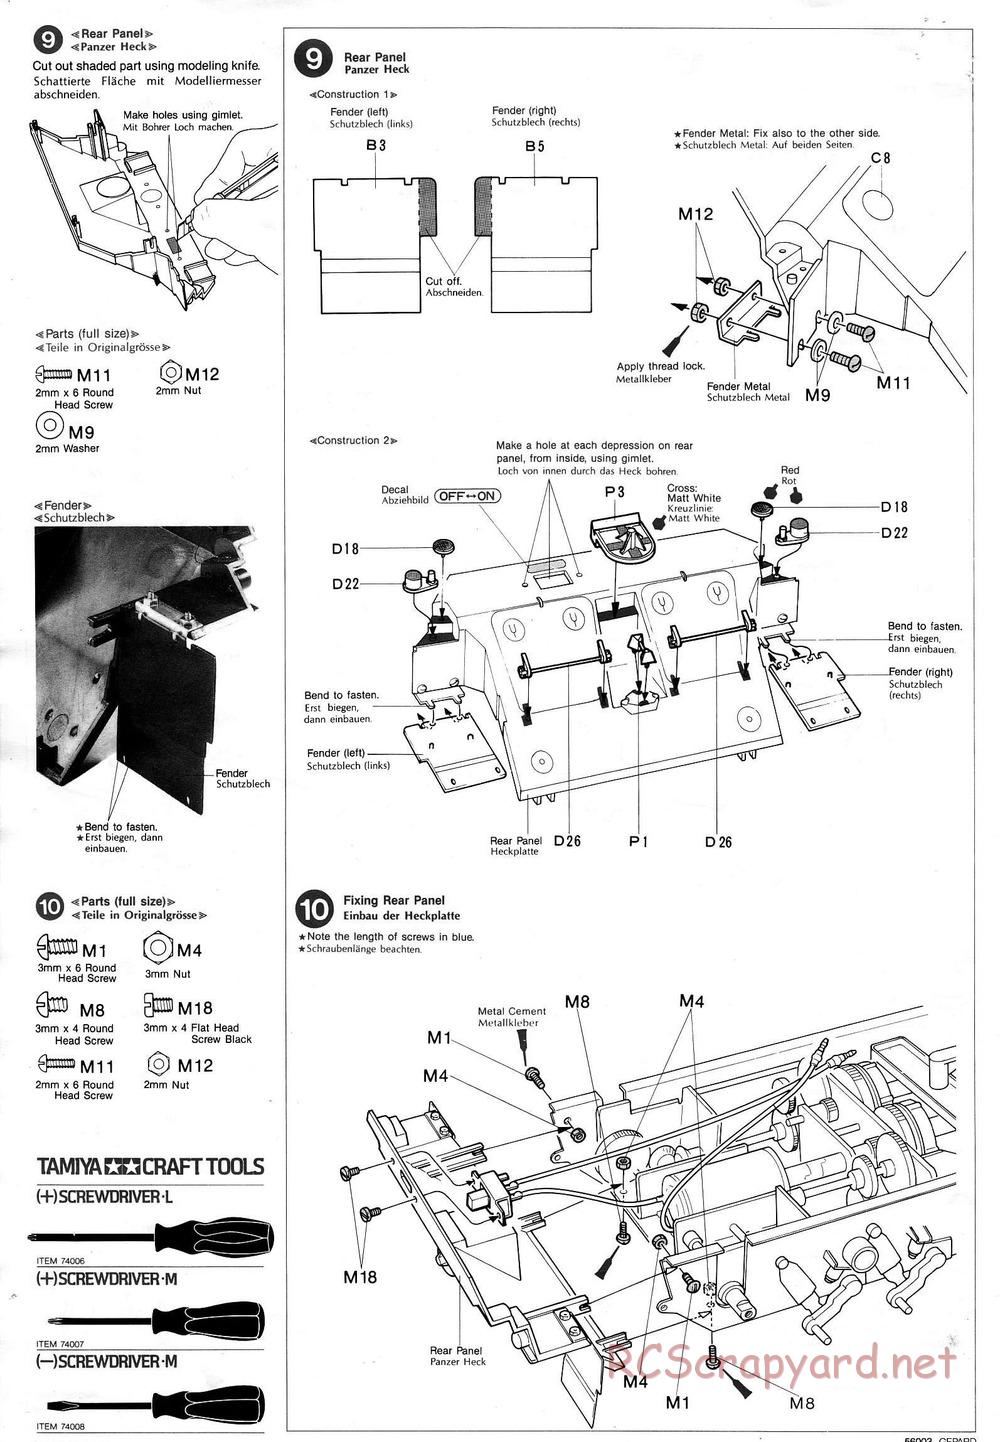 Tamiya - Flakpanzer Gepard - 1/16 Scale Chassis - Manual - Page 6